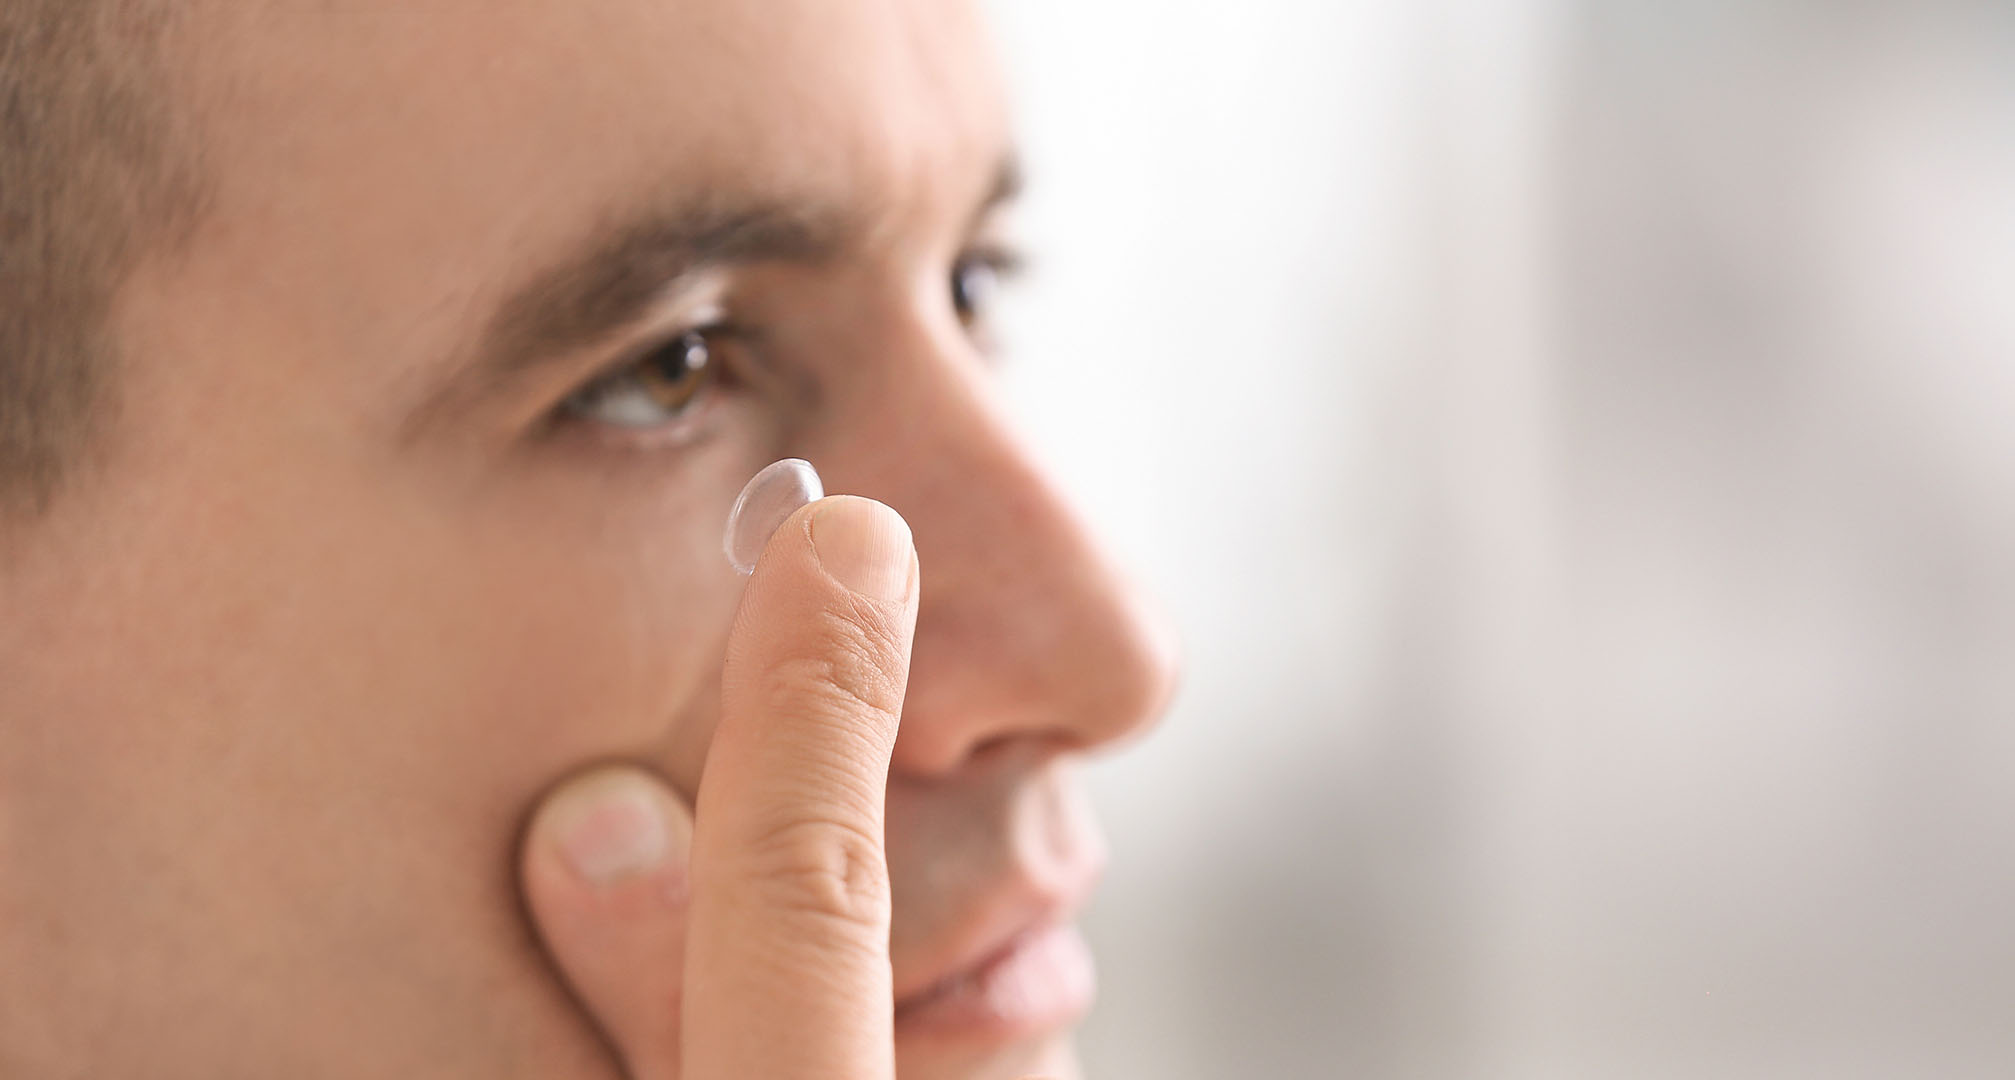 Is it safe to wear contact lenses